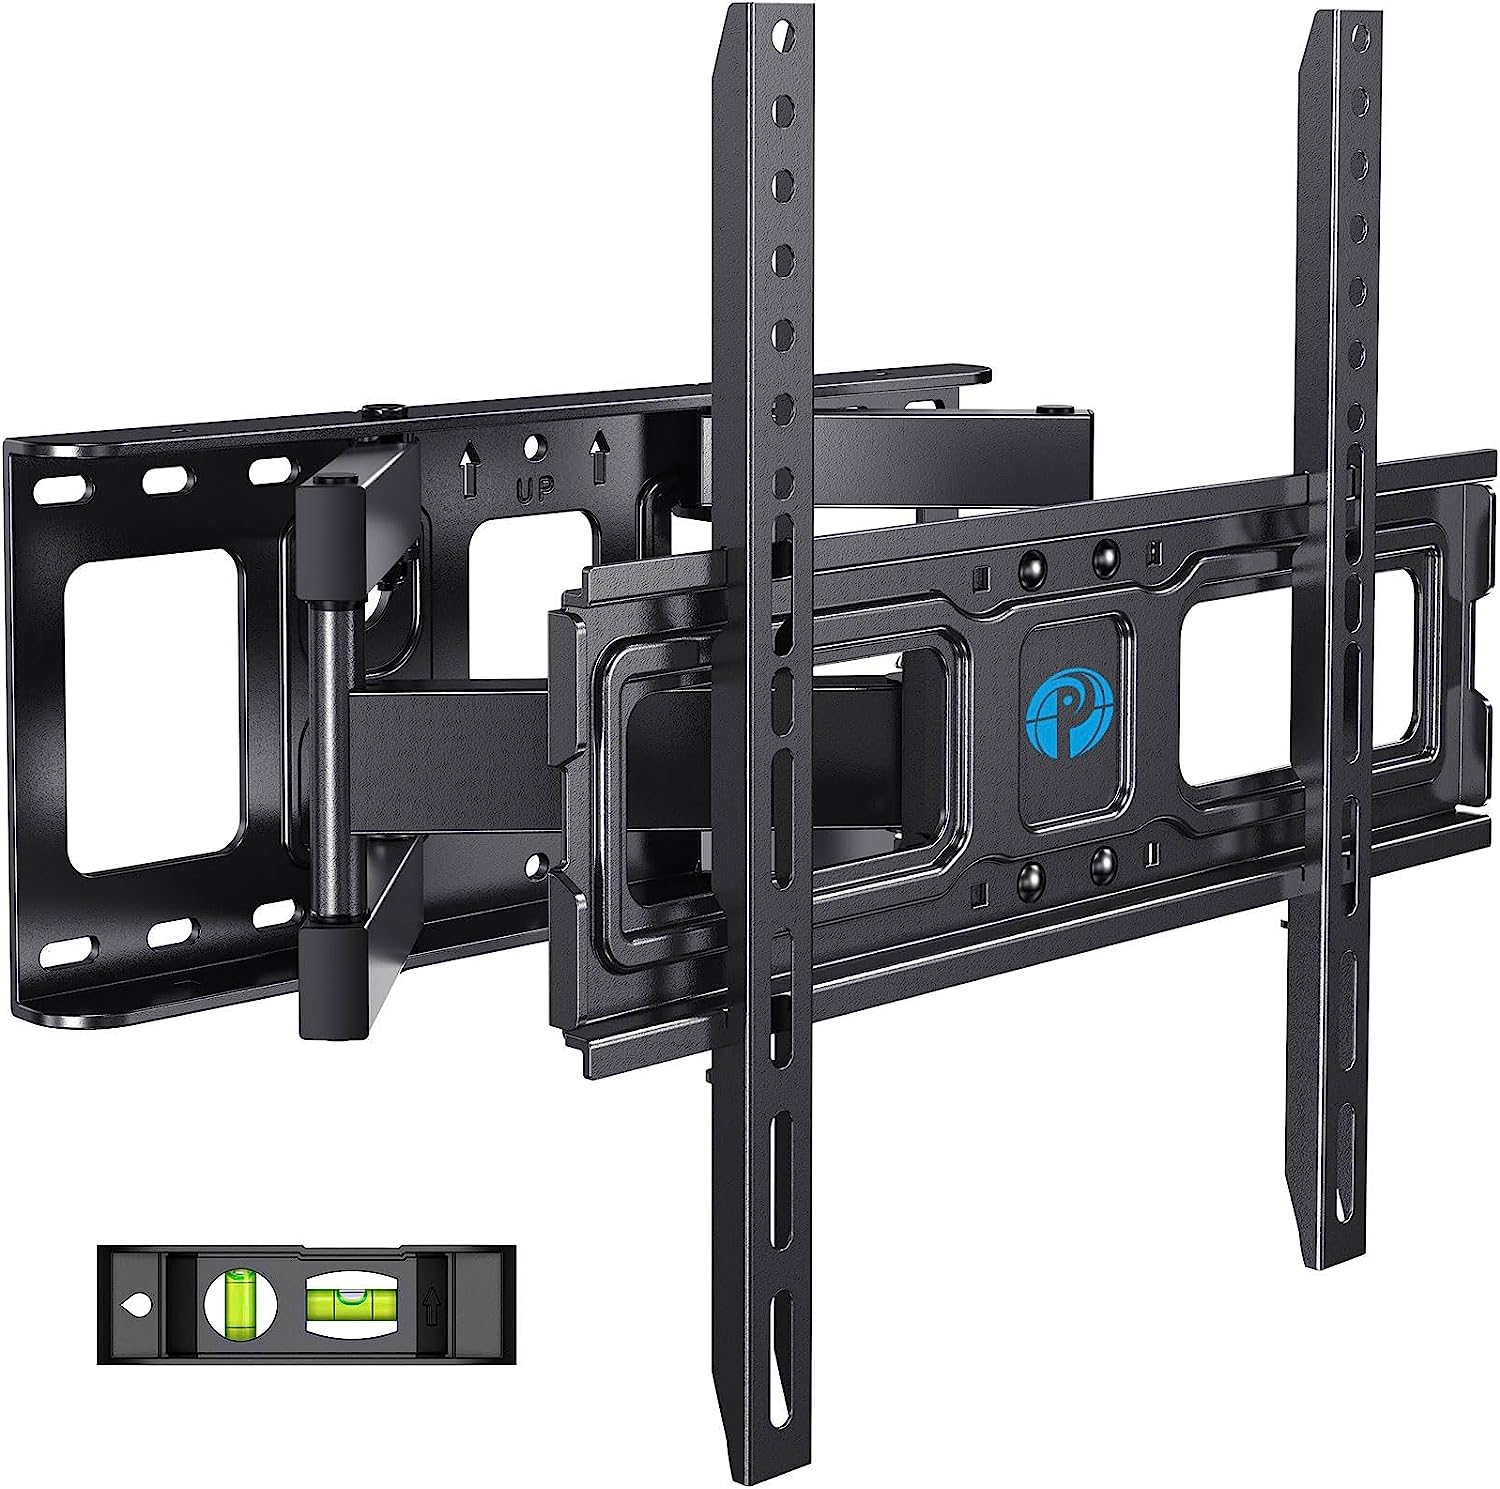 Pipishell TV Wall Mount for 26-65 inch LED LCD OLED 4K [...]